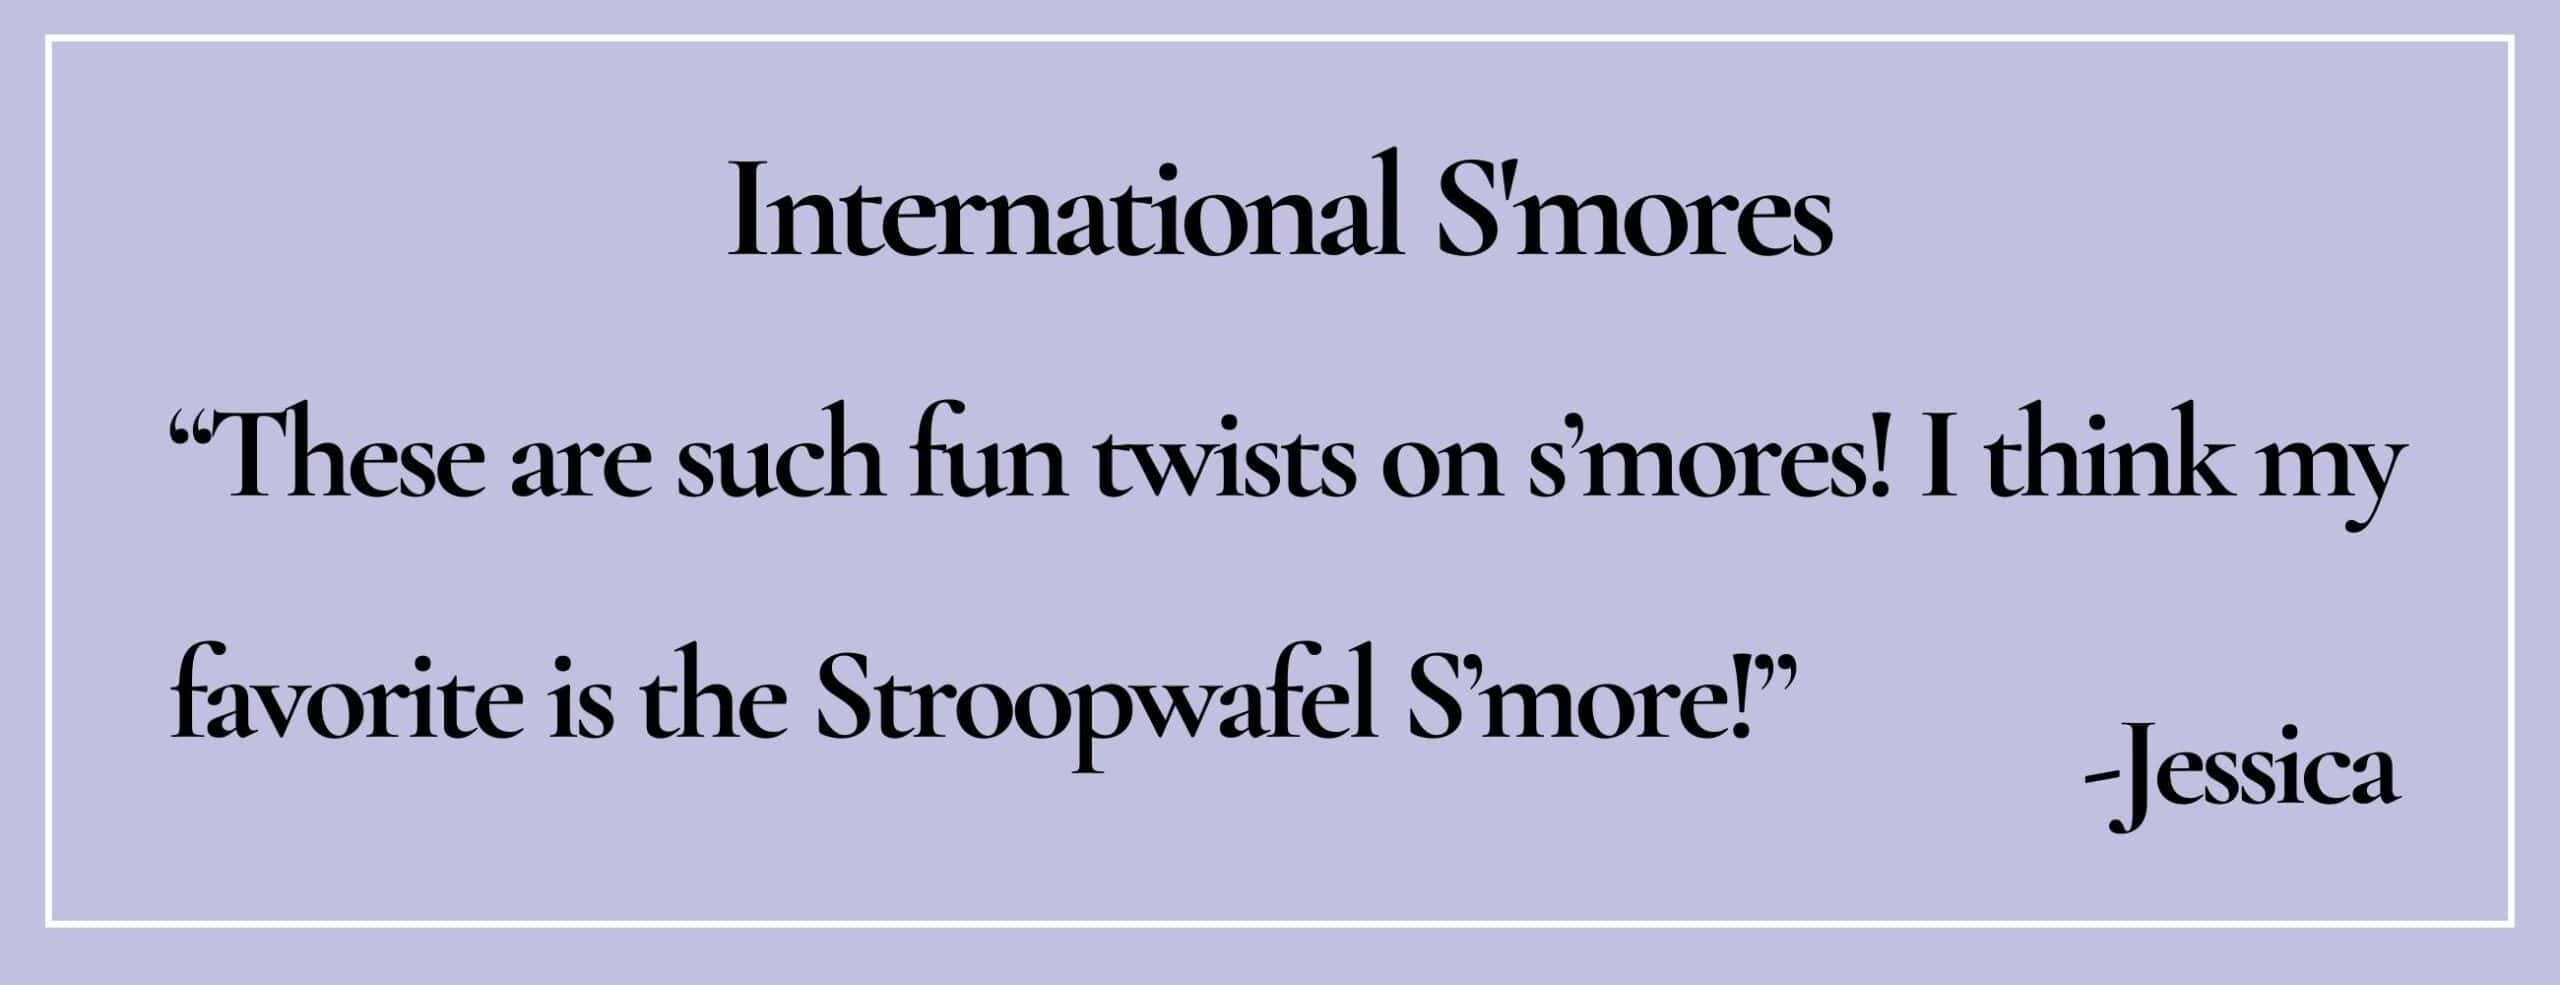 text box with quote: "These are such fun twists on s’mores! I think my favorite is the Stroopwafel S’more!"-Jessica